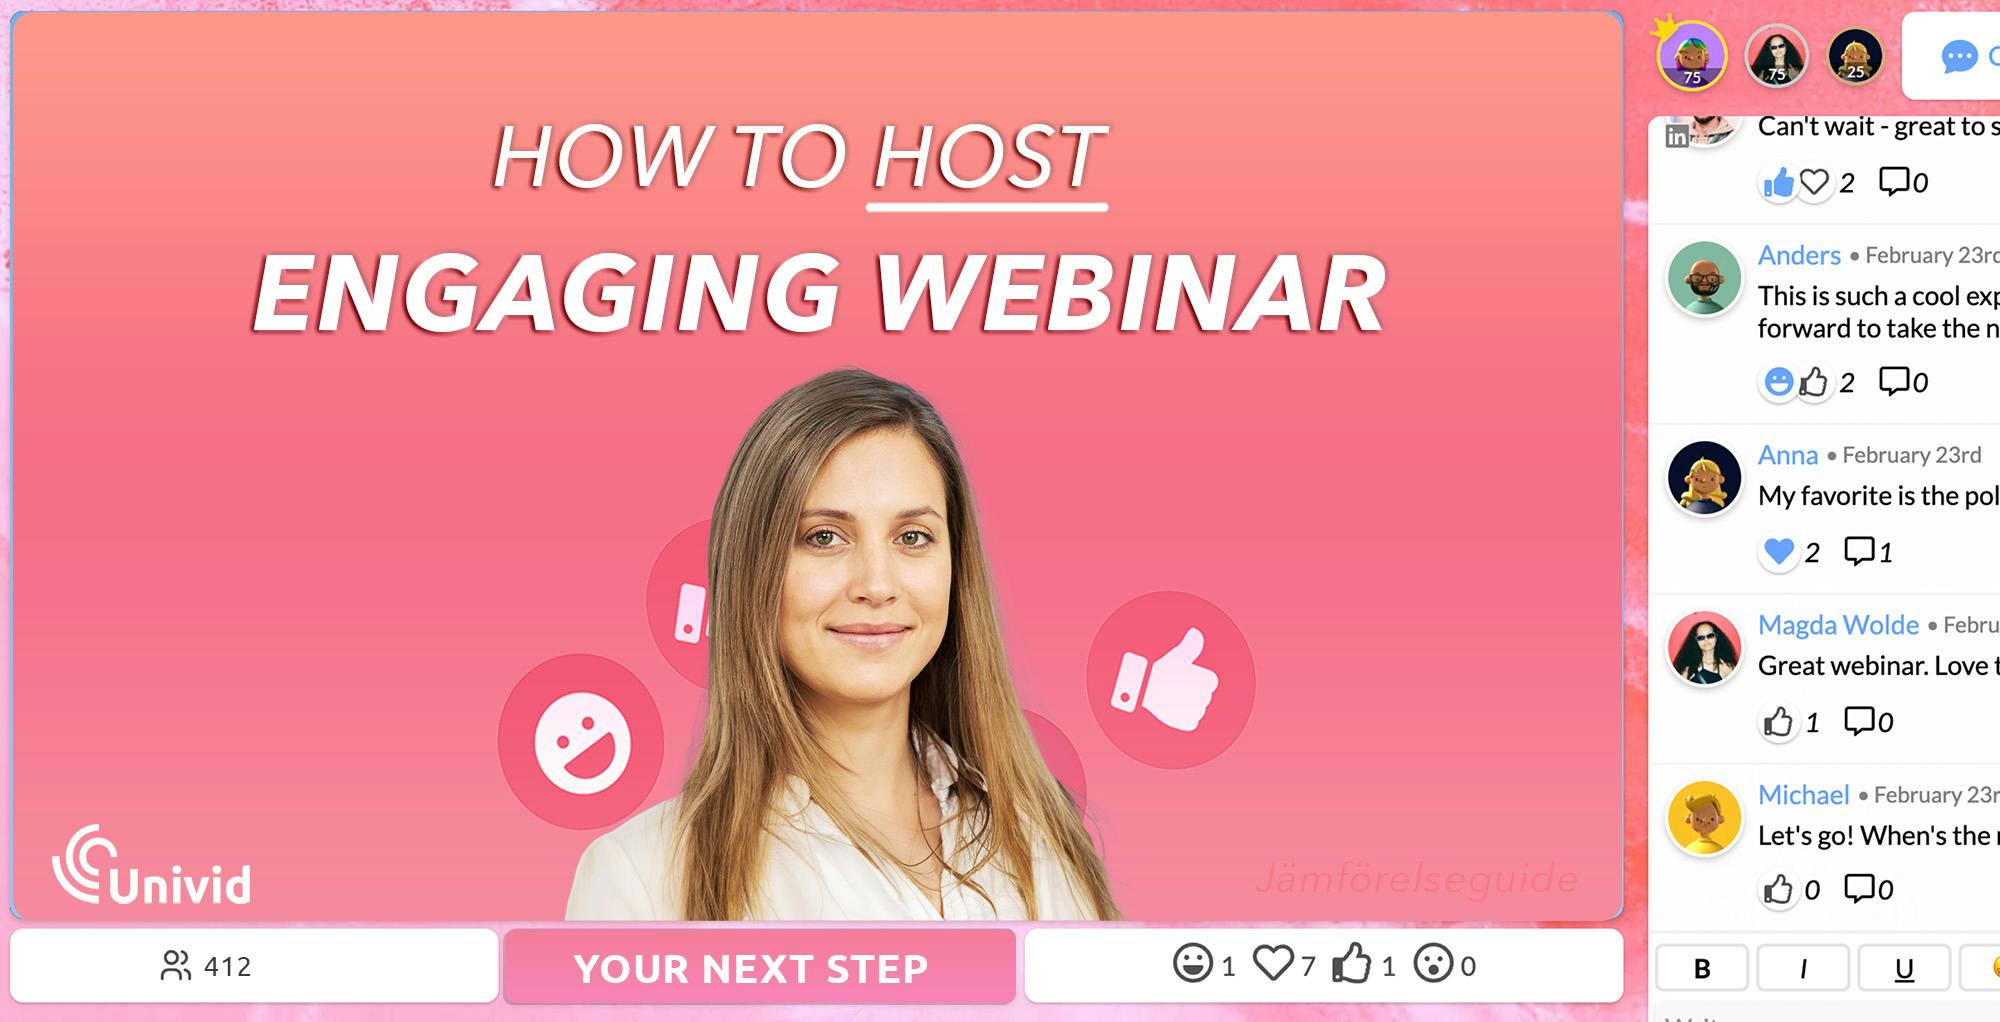 Hosting engaging webinars requires remembering a few small details that can make a huge change. Often just highlighting the chat, reactions, or the Q&A can give a spike in engagement. In this article, we share 7 ways you can make your webinar engaging and interactive - the two things that that boost conversions and memorability.